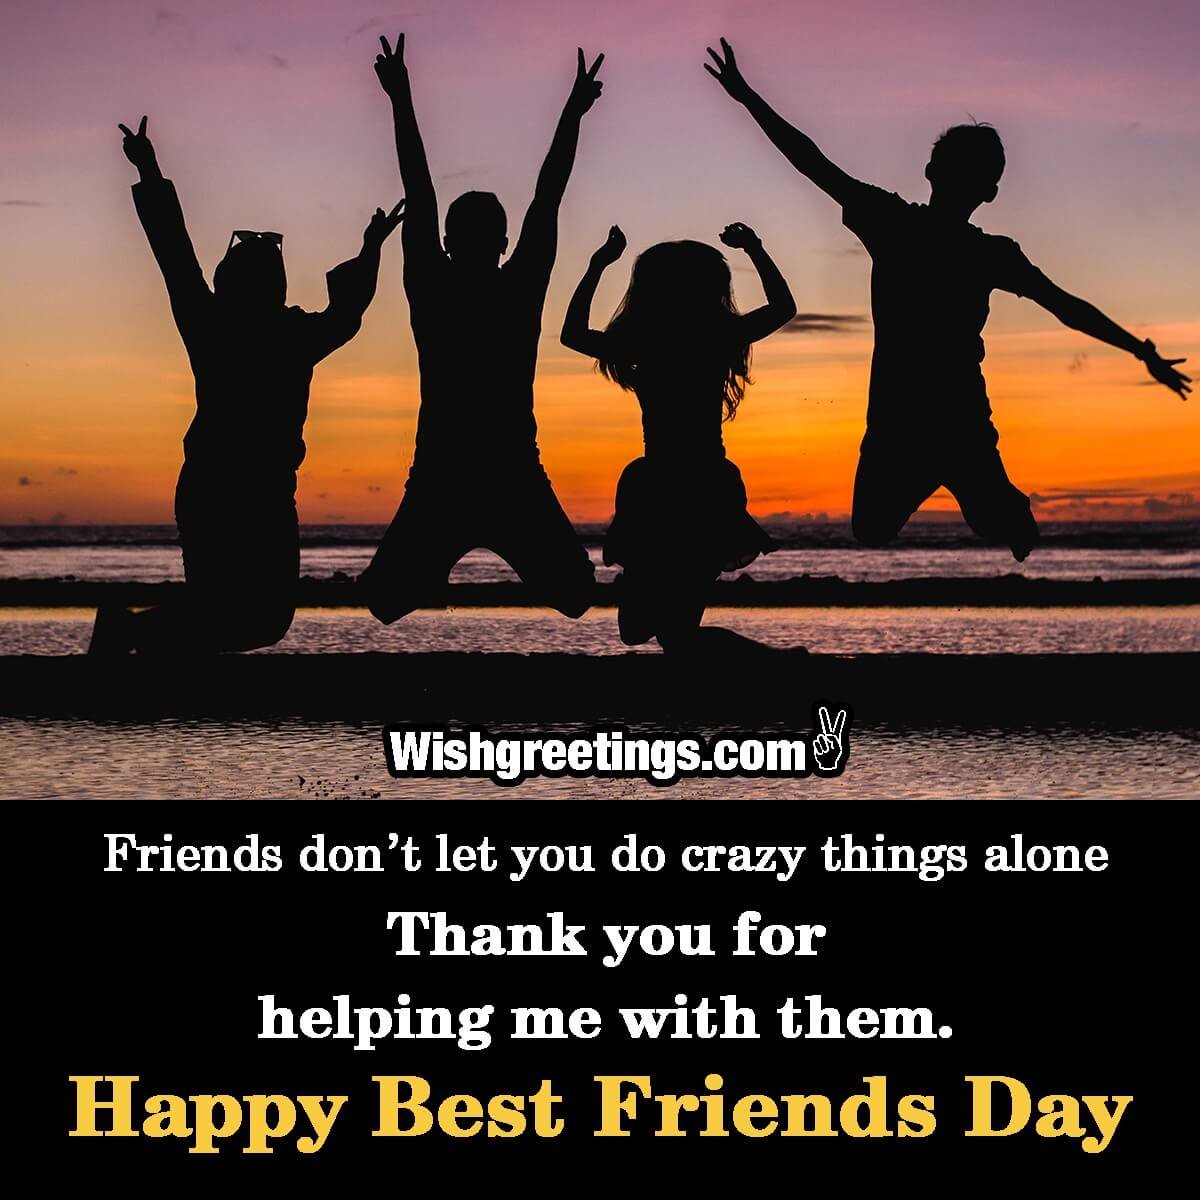 Best Friends Day Wishes Messages - Wish Greetings